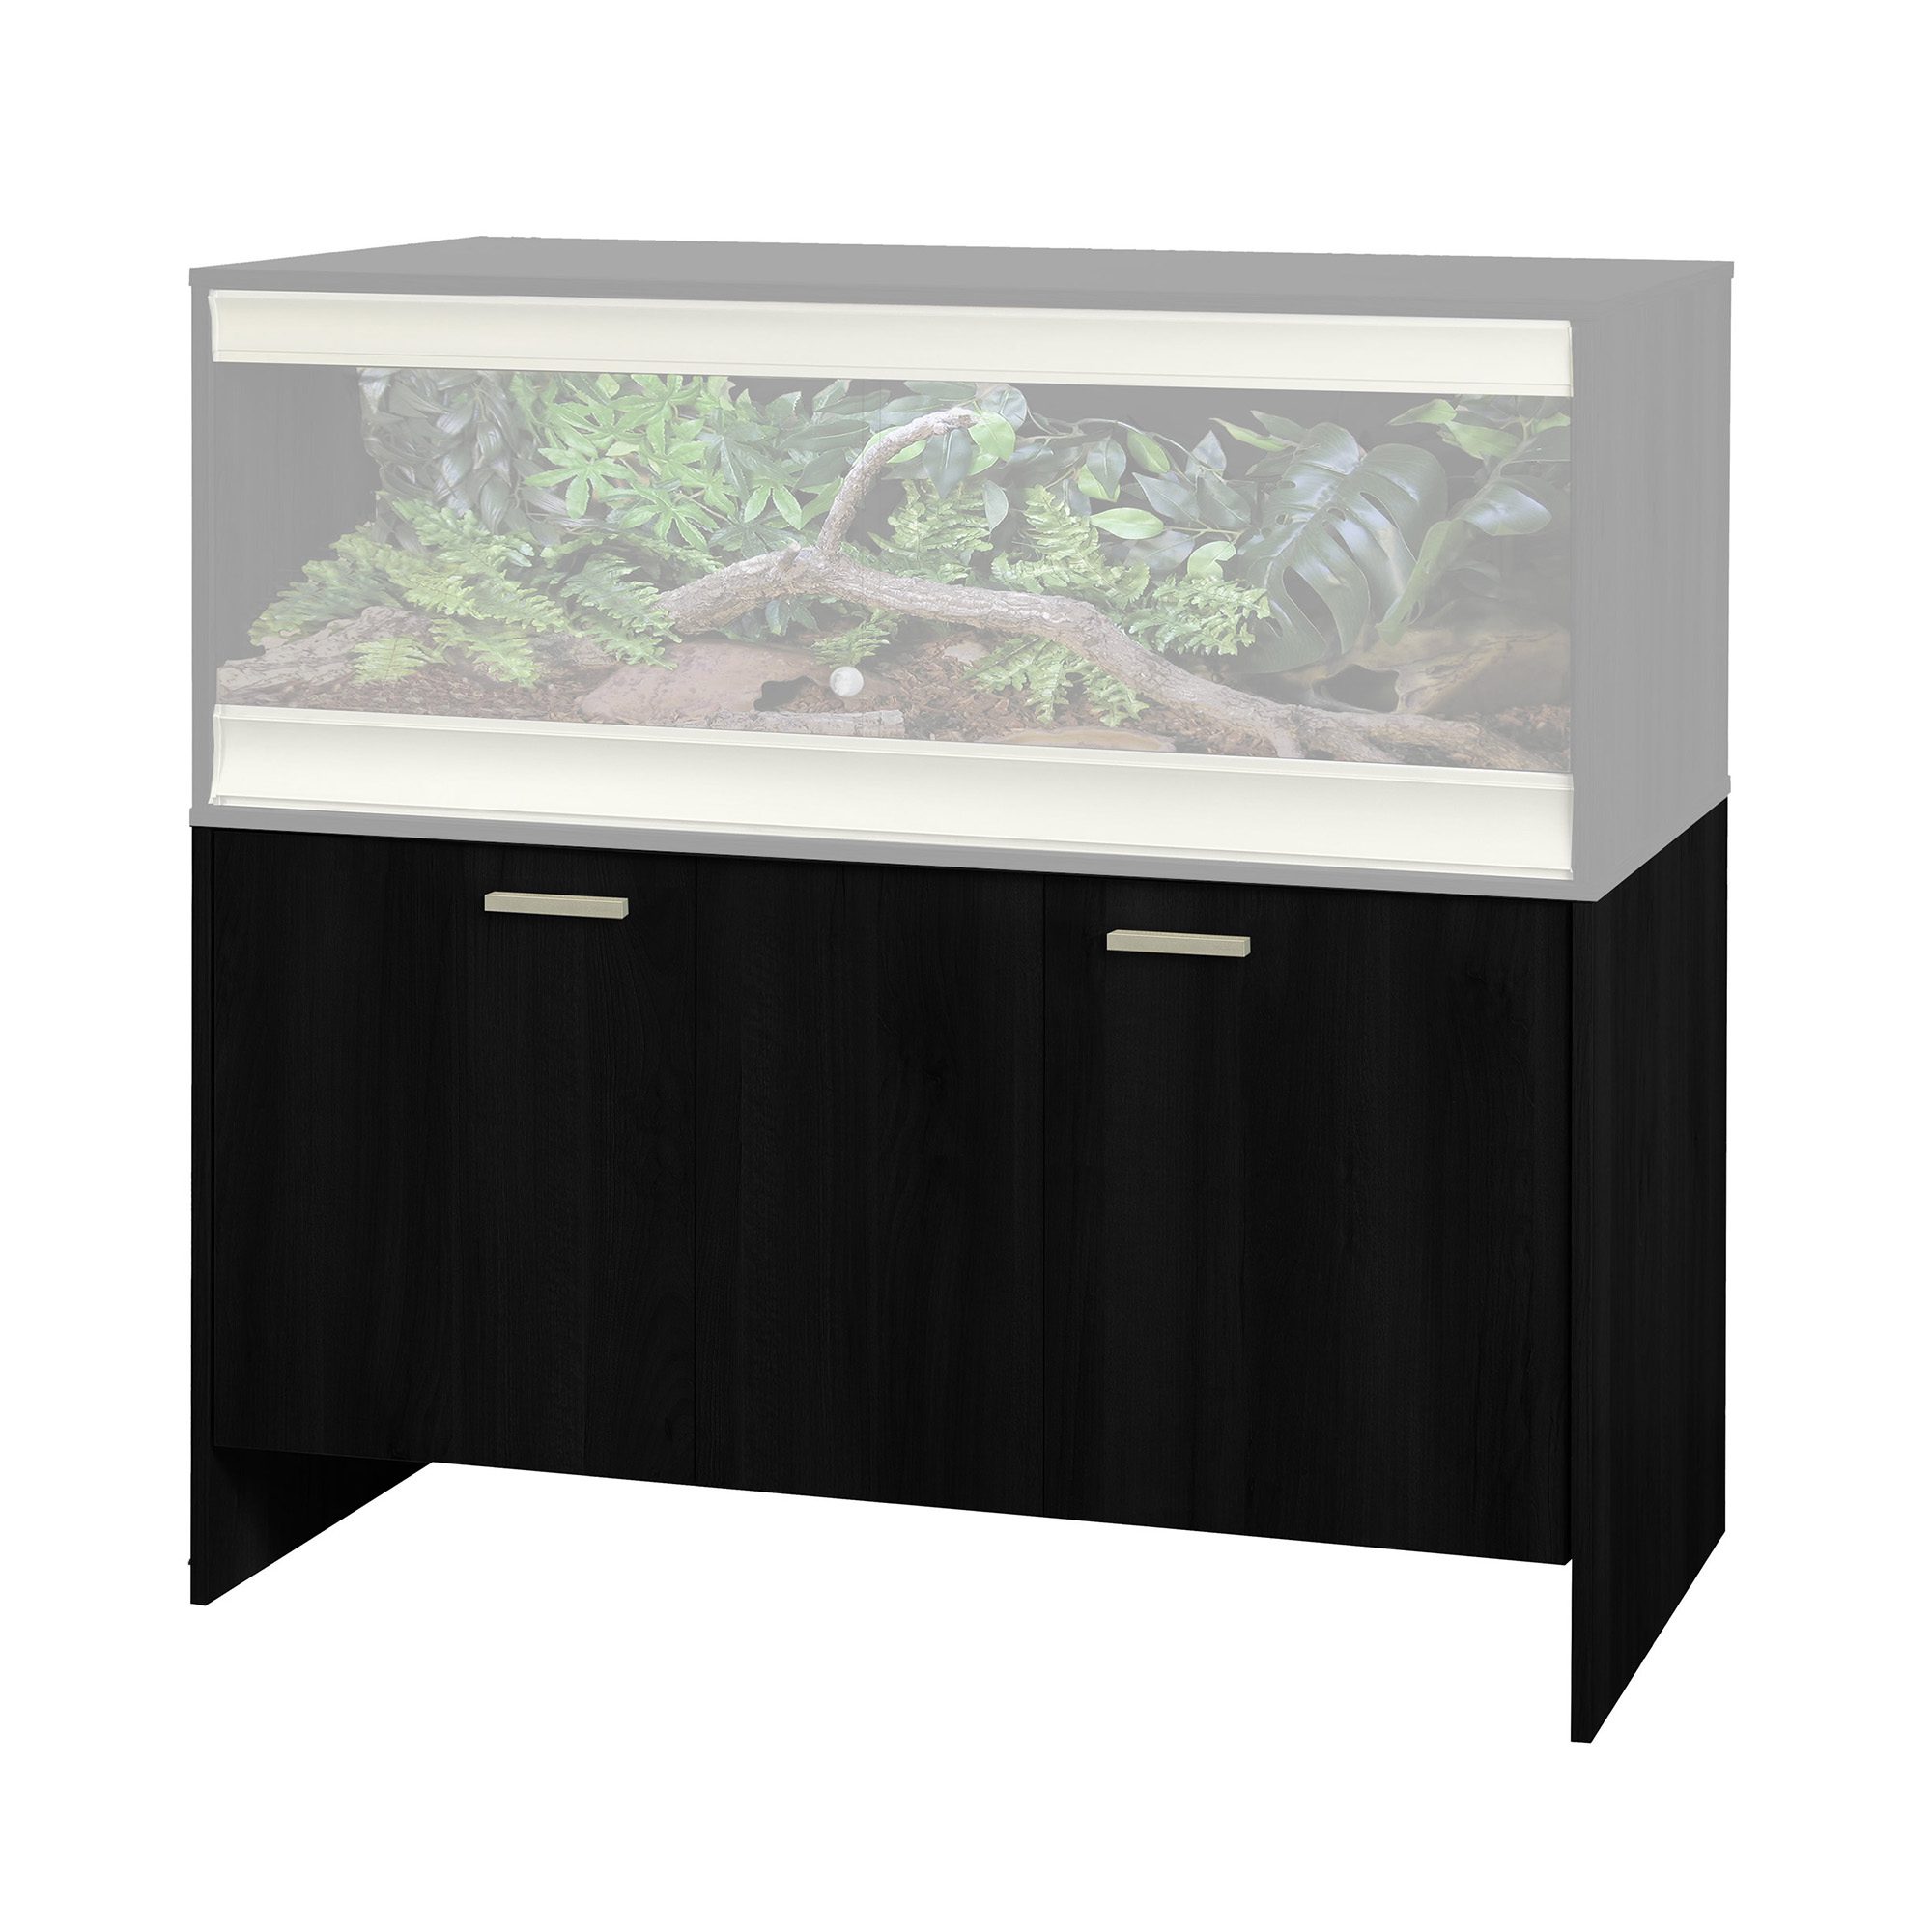 VE Repti-Home Cabinet (AAL) BD Black, PT4164